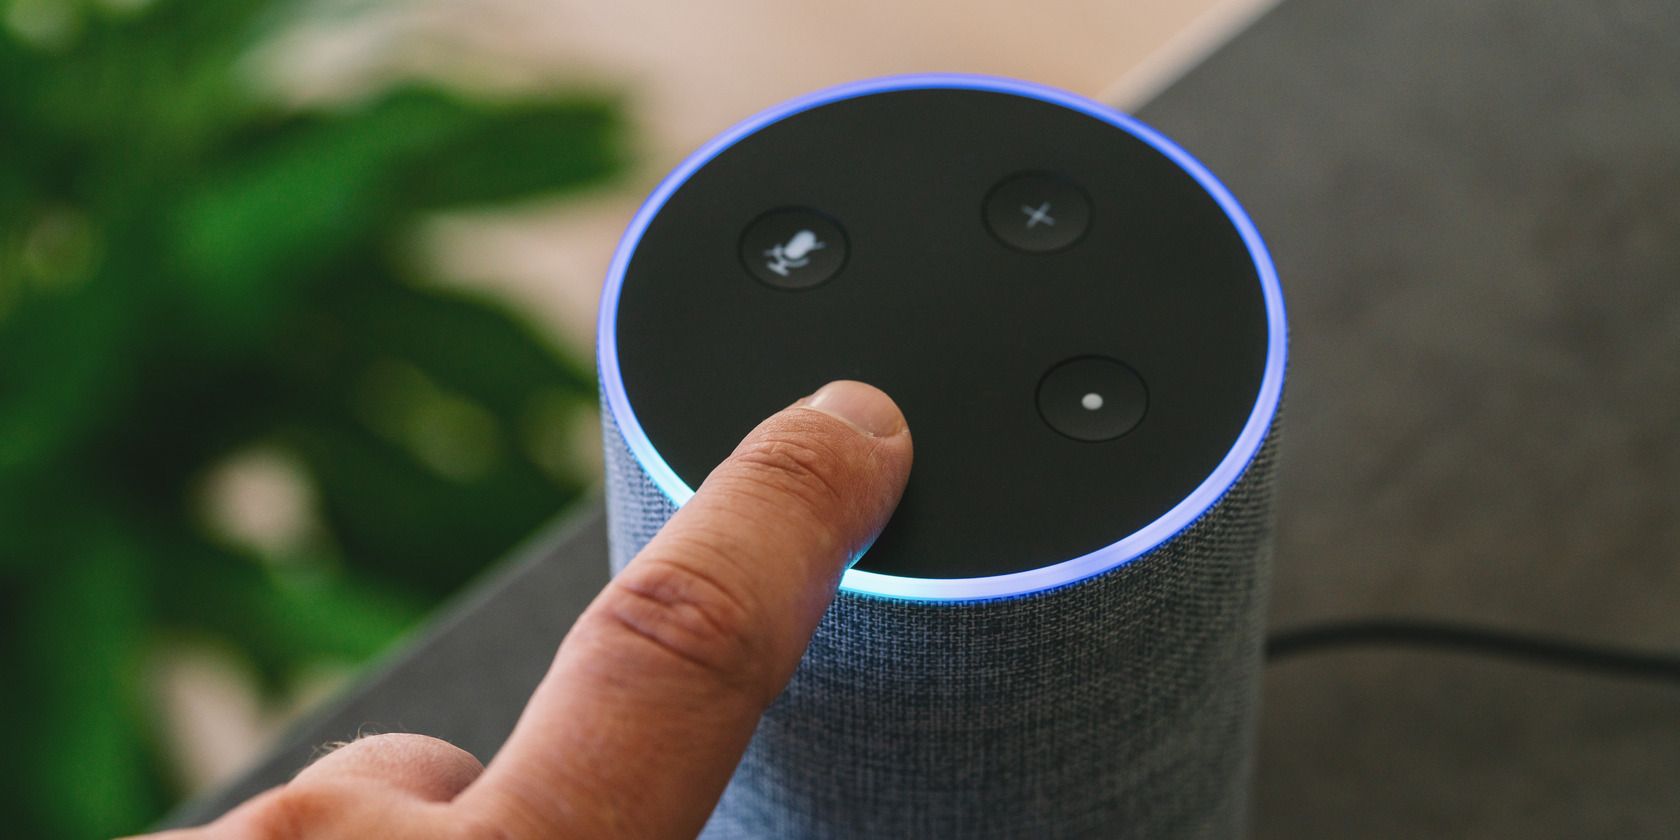 Amazon Echo smart speaker with a person's finger holding a button on the device